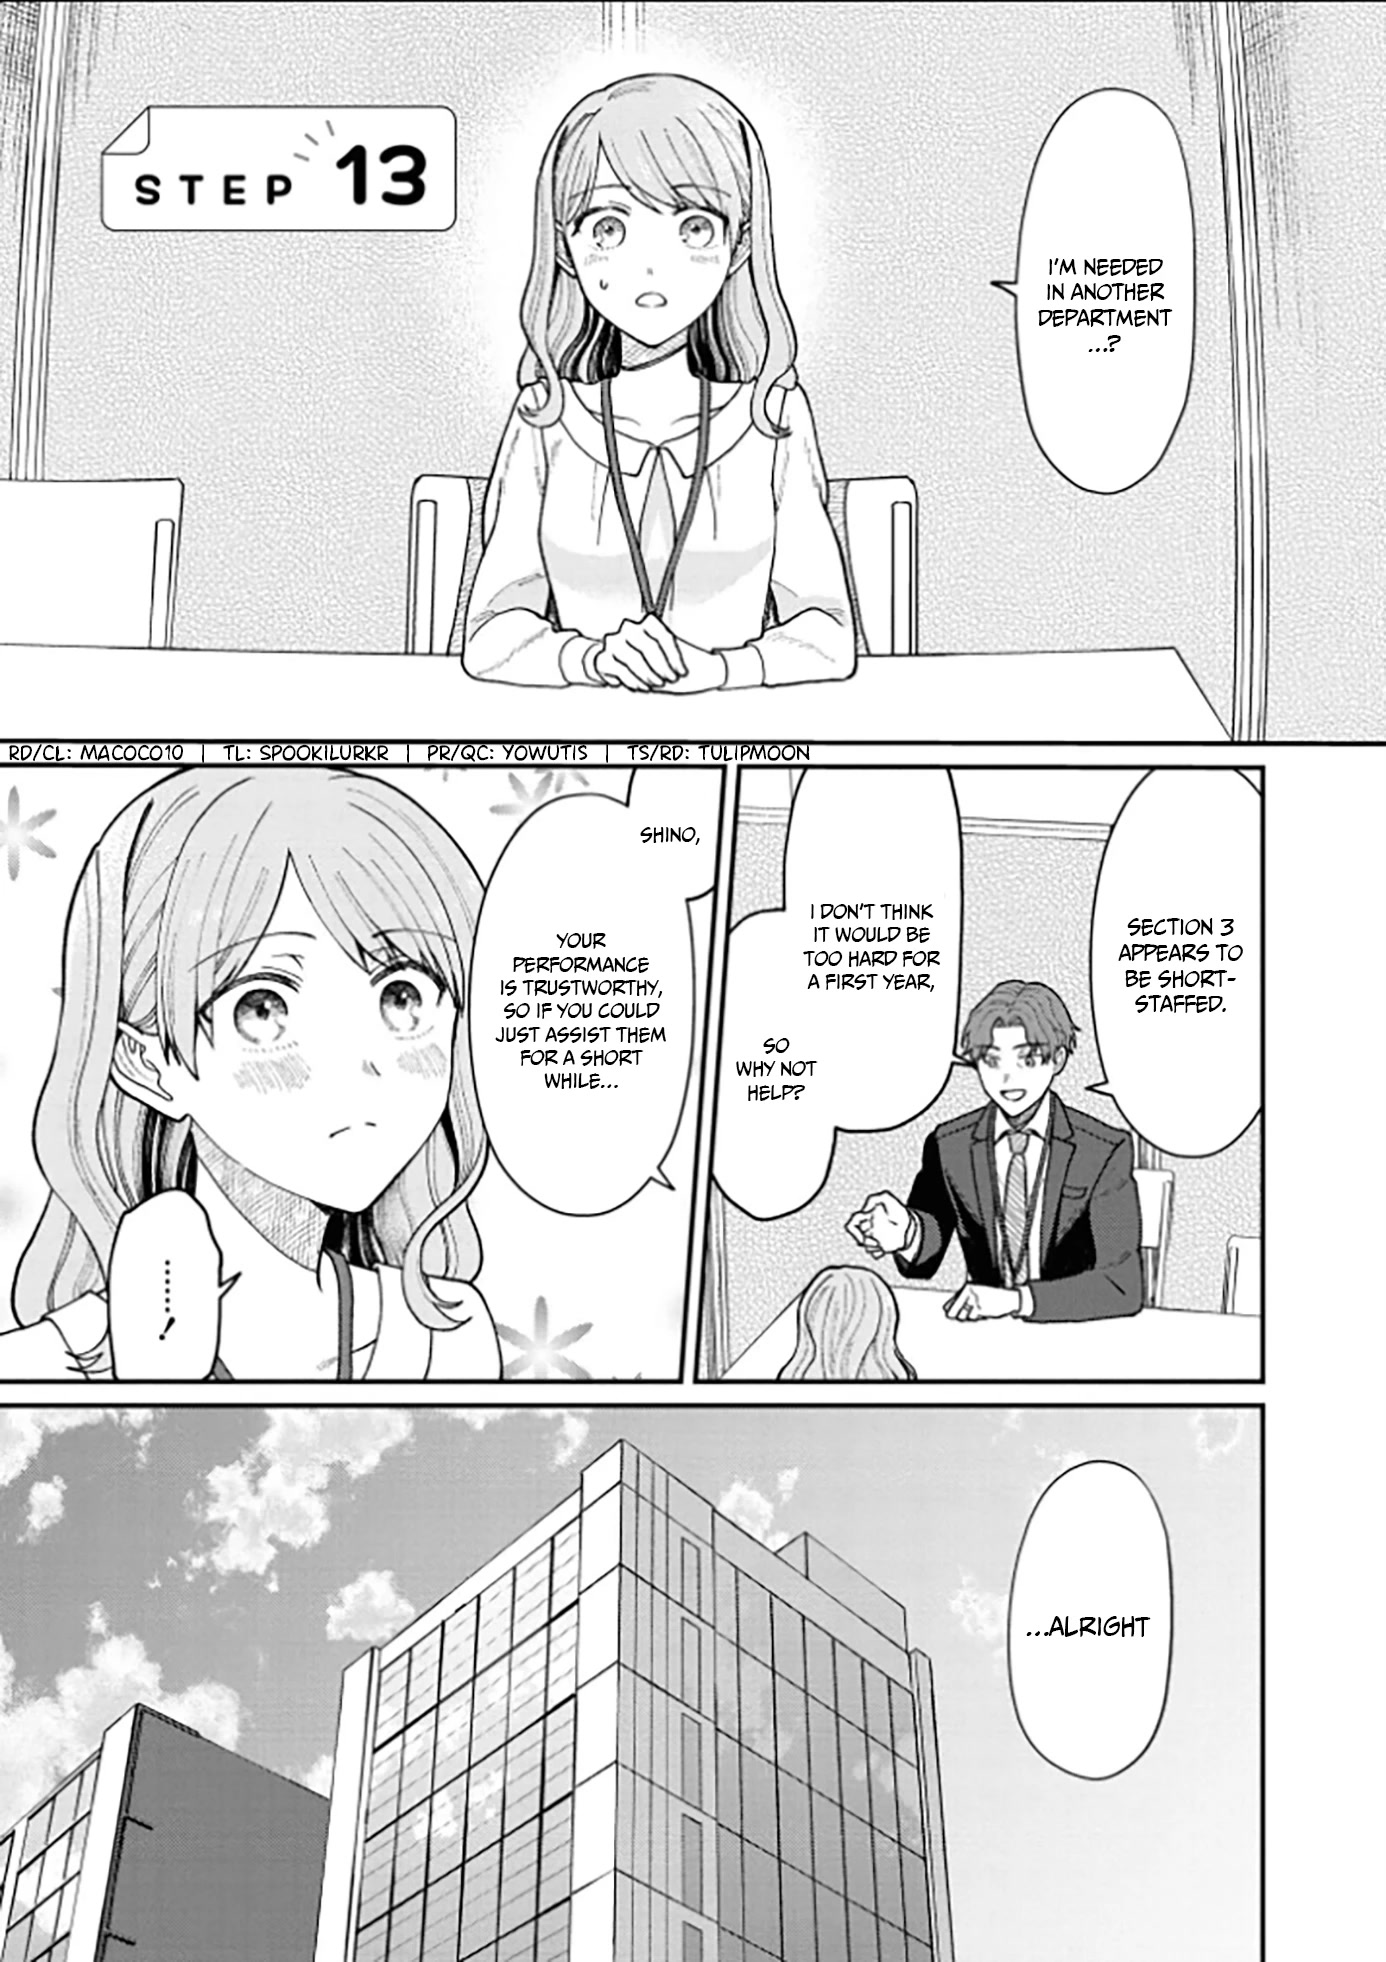 The New-Hire Who Could "Read" Emotions and the Unsociable Senpai - chapter 13 - #2